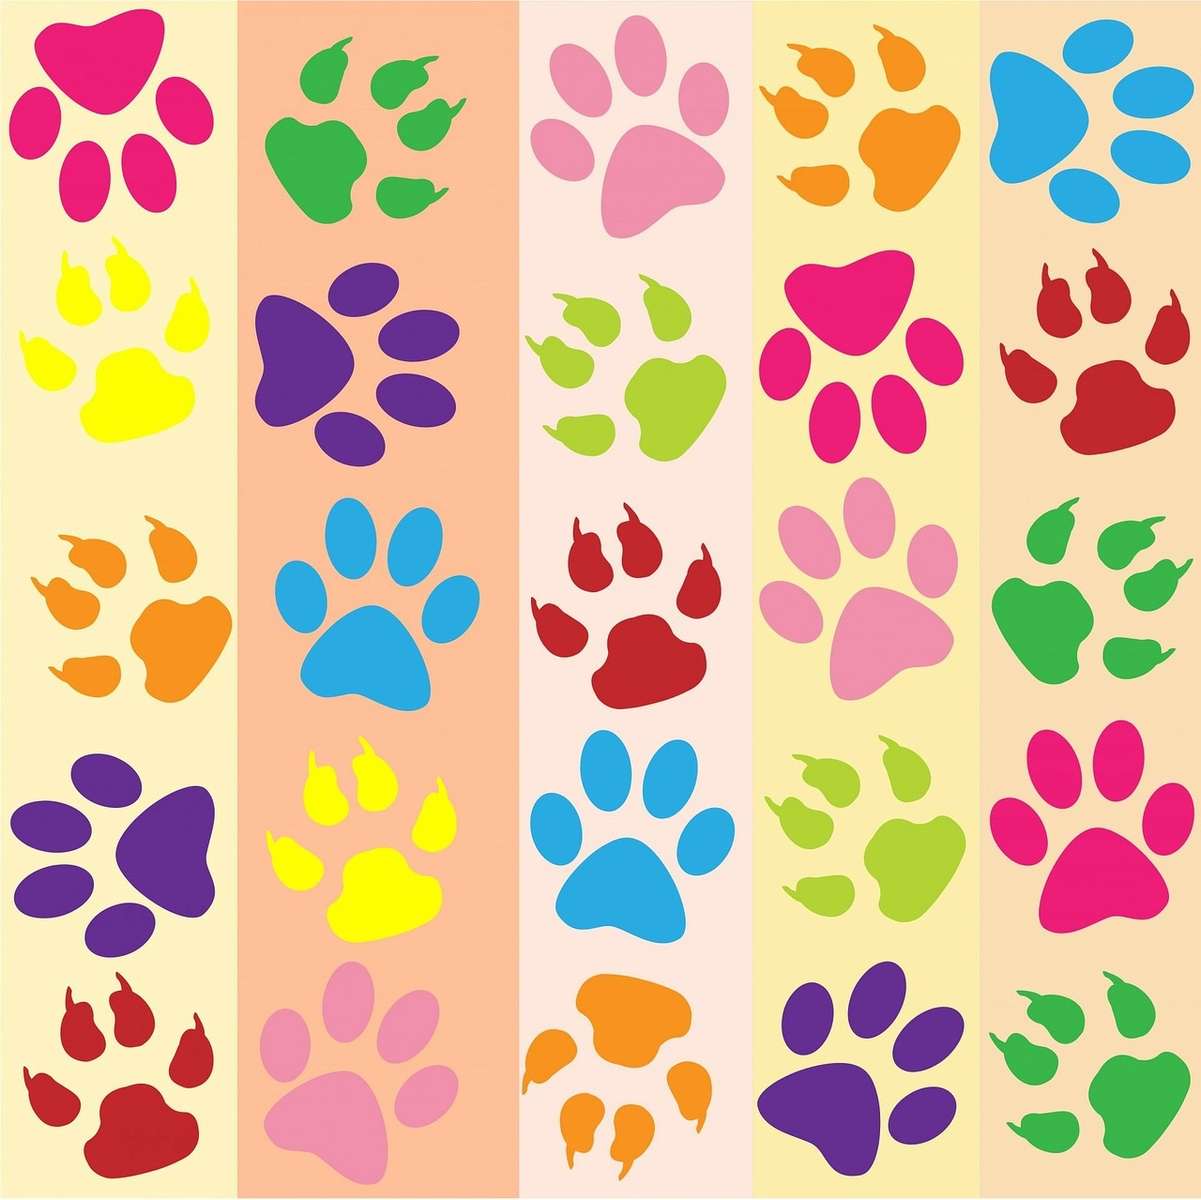 Colorful paw prints jigsaw puzzle online